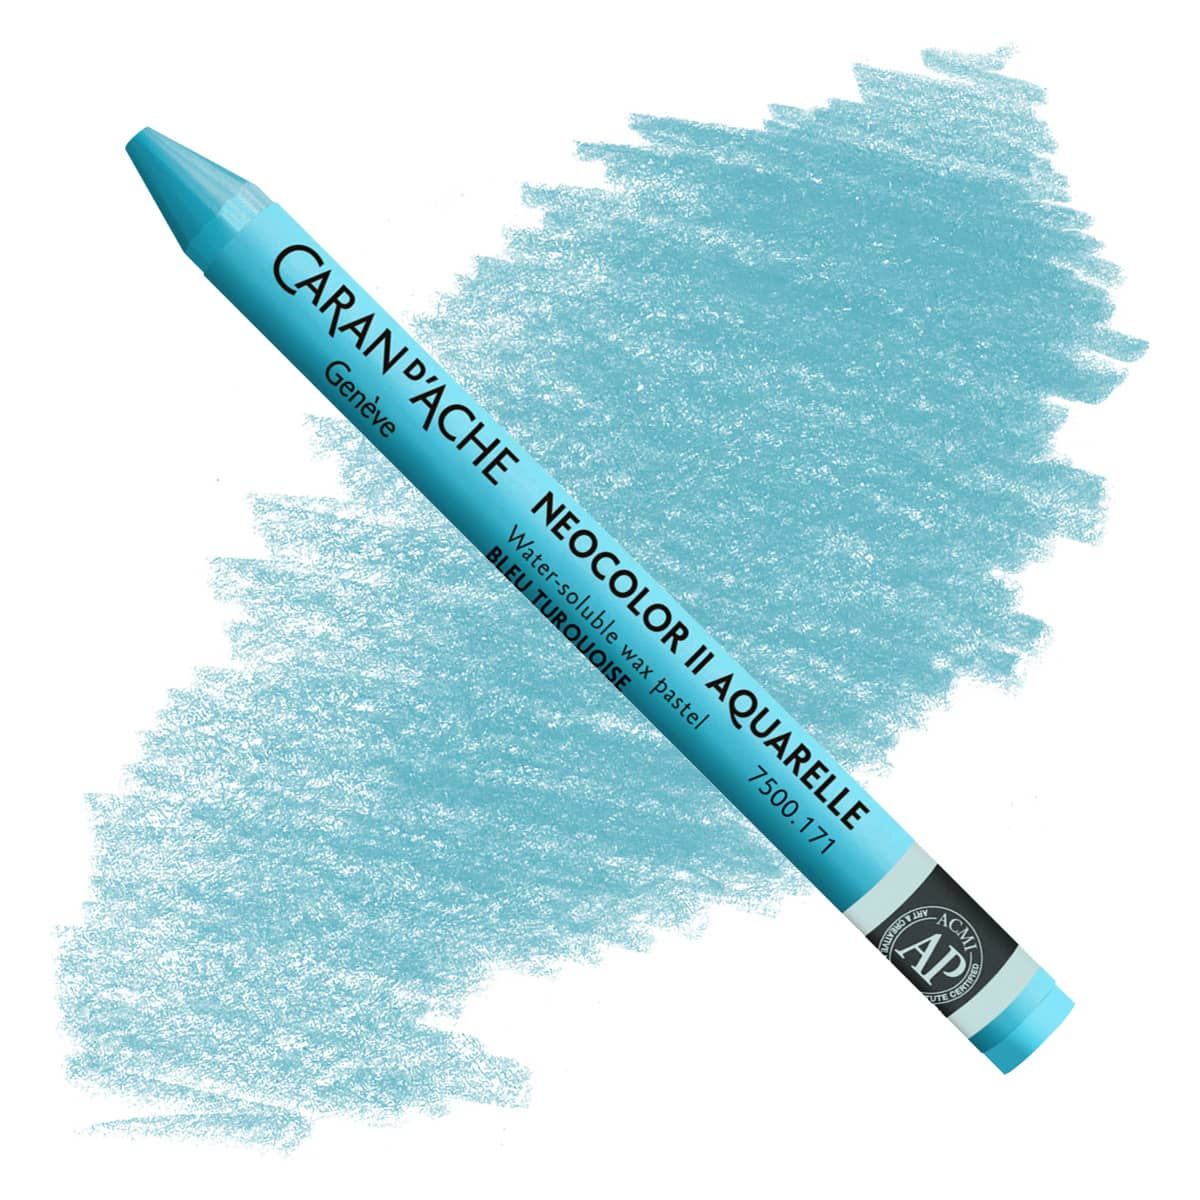 Caran d'Ache Neocolor II Water-Soluble Wax Pastels - Turquoise Blue, No. 171